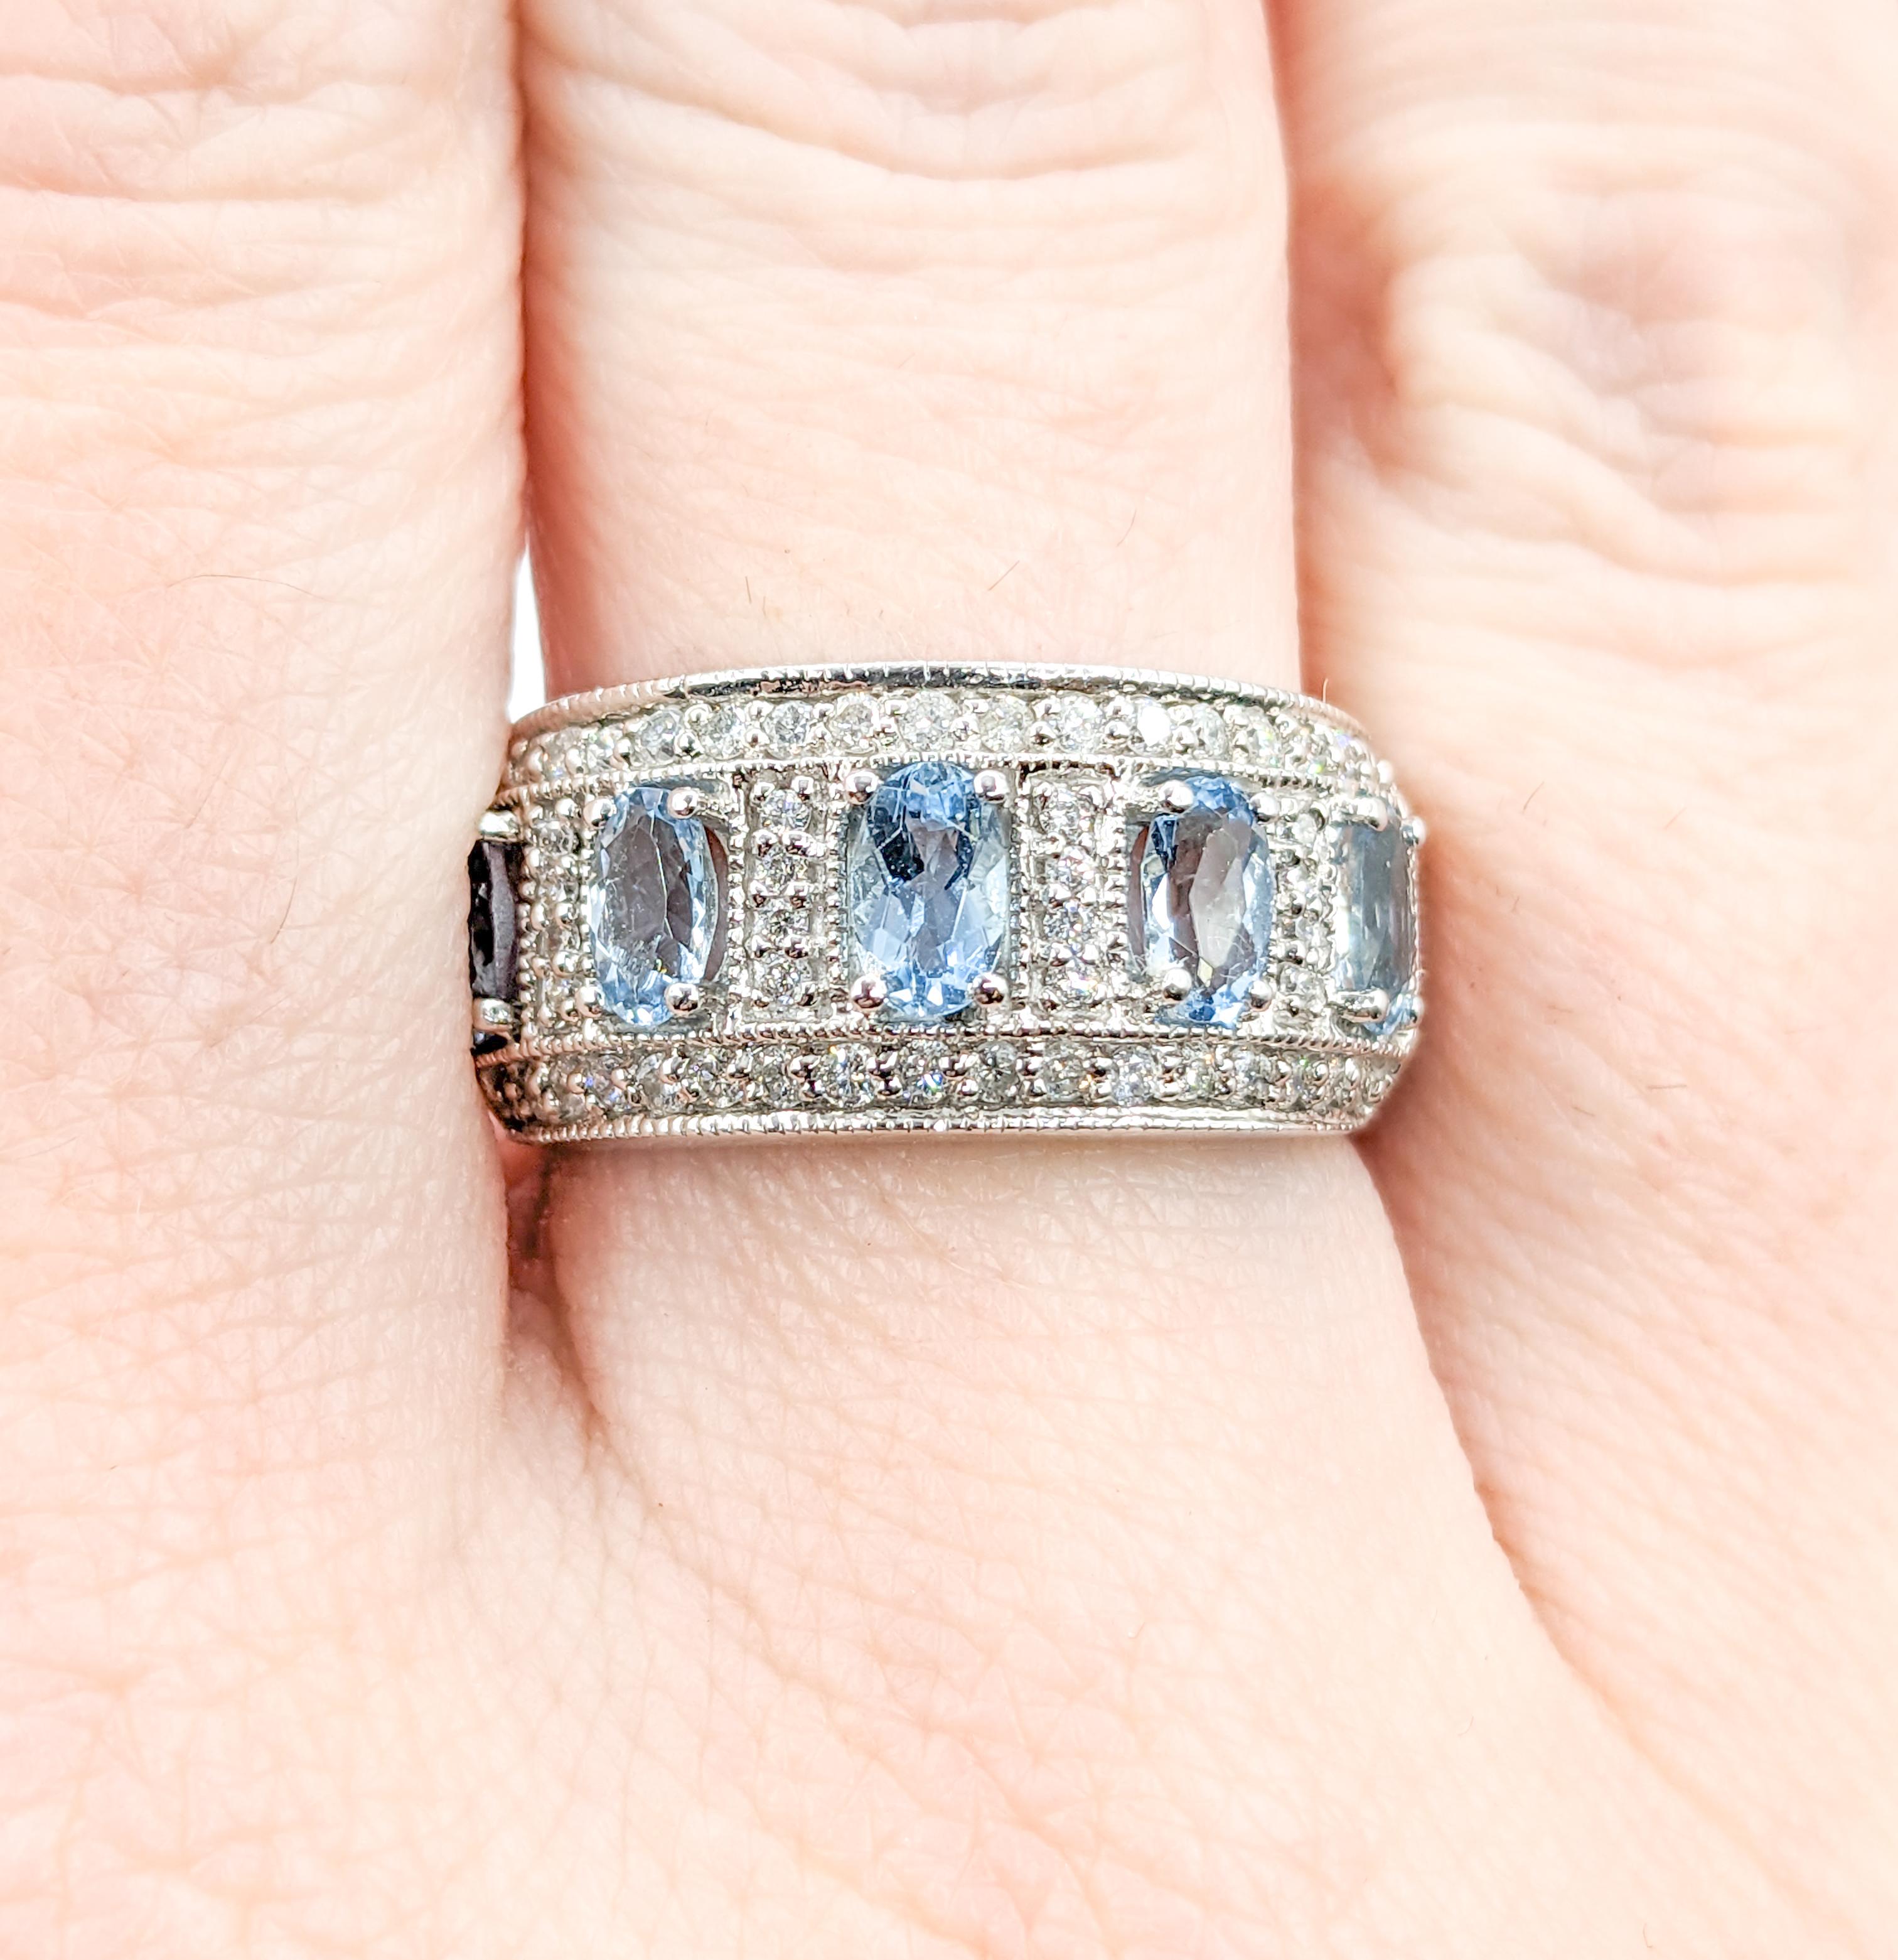 Fabulous Aquamarine & Diamond Wide Band Ring in White Gold

Elevate your style with this exquisite 14 karat white gold ring, a true embodiment of beauty and sophistication. This stunning piece showcases a dazzling 1.0 carat total weight oval